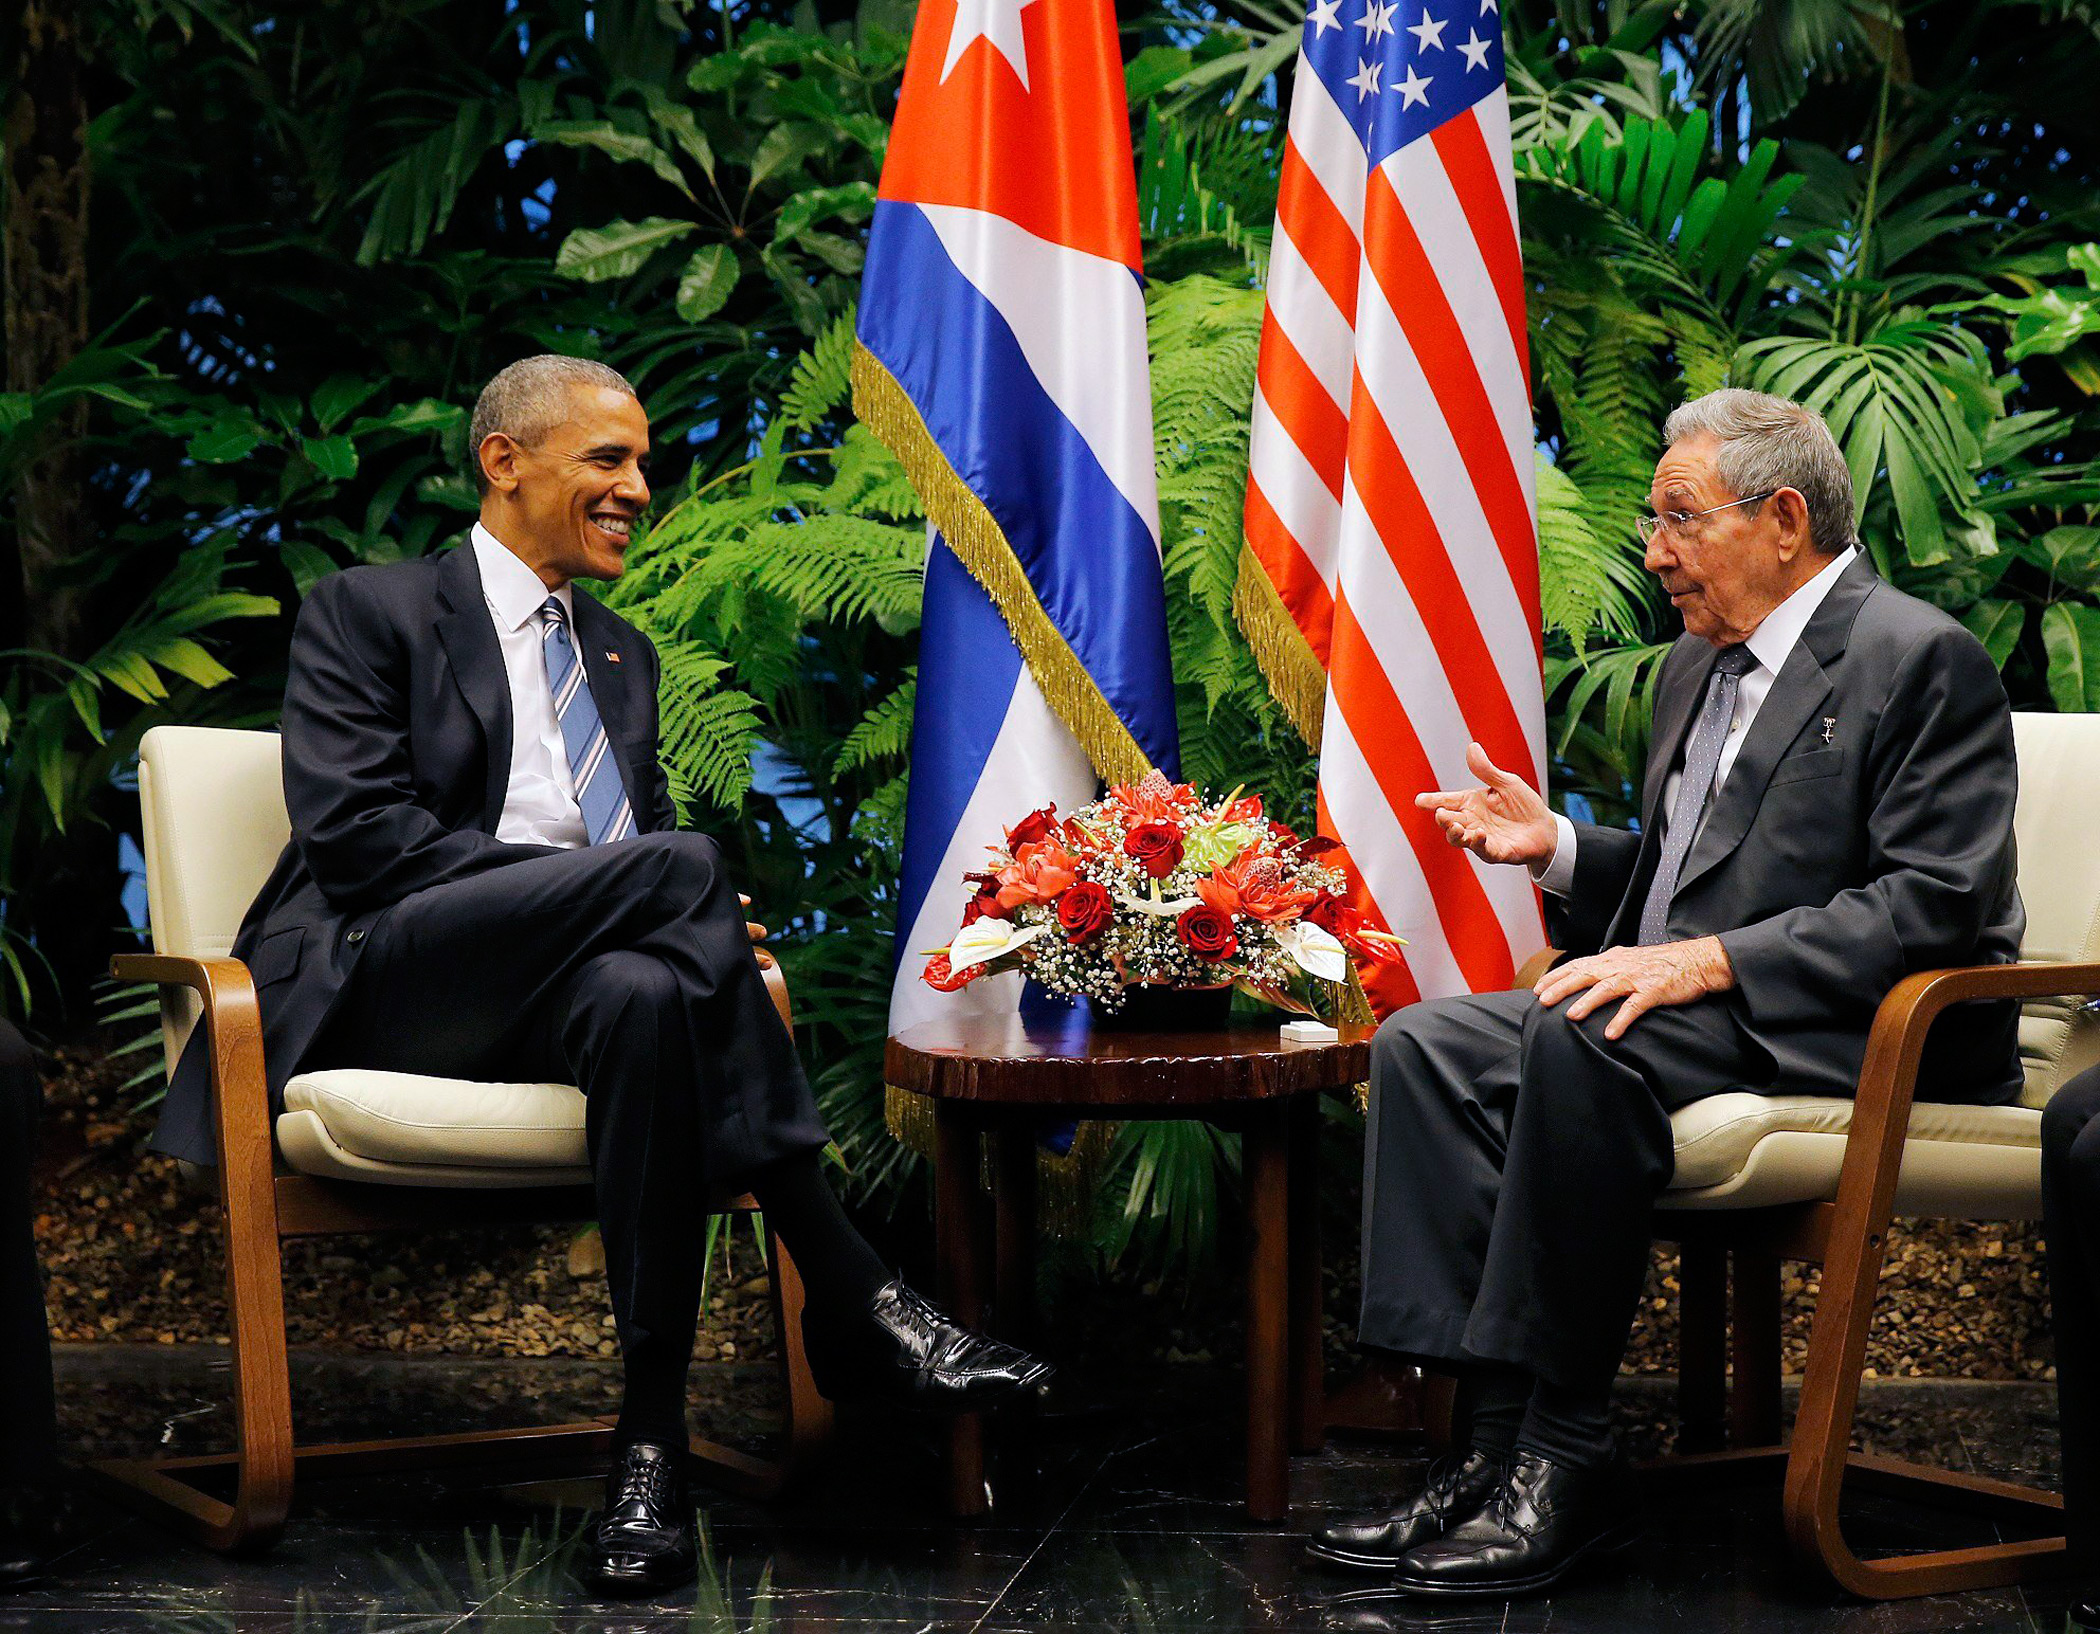 U.S. President Barack Obama and Cuba's President Raul Castro hold their first meeting of Obama's visit to Cuba on March 21, 2016.